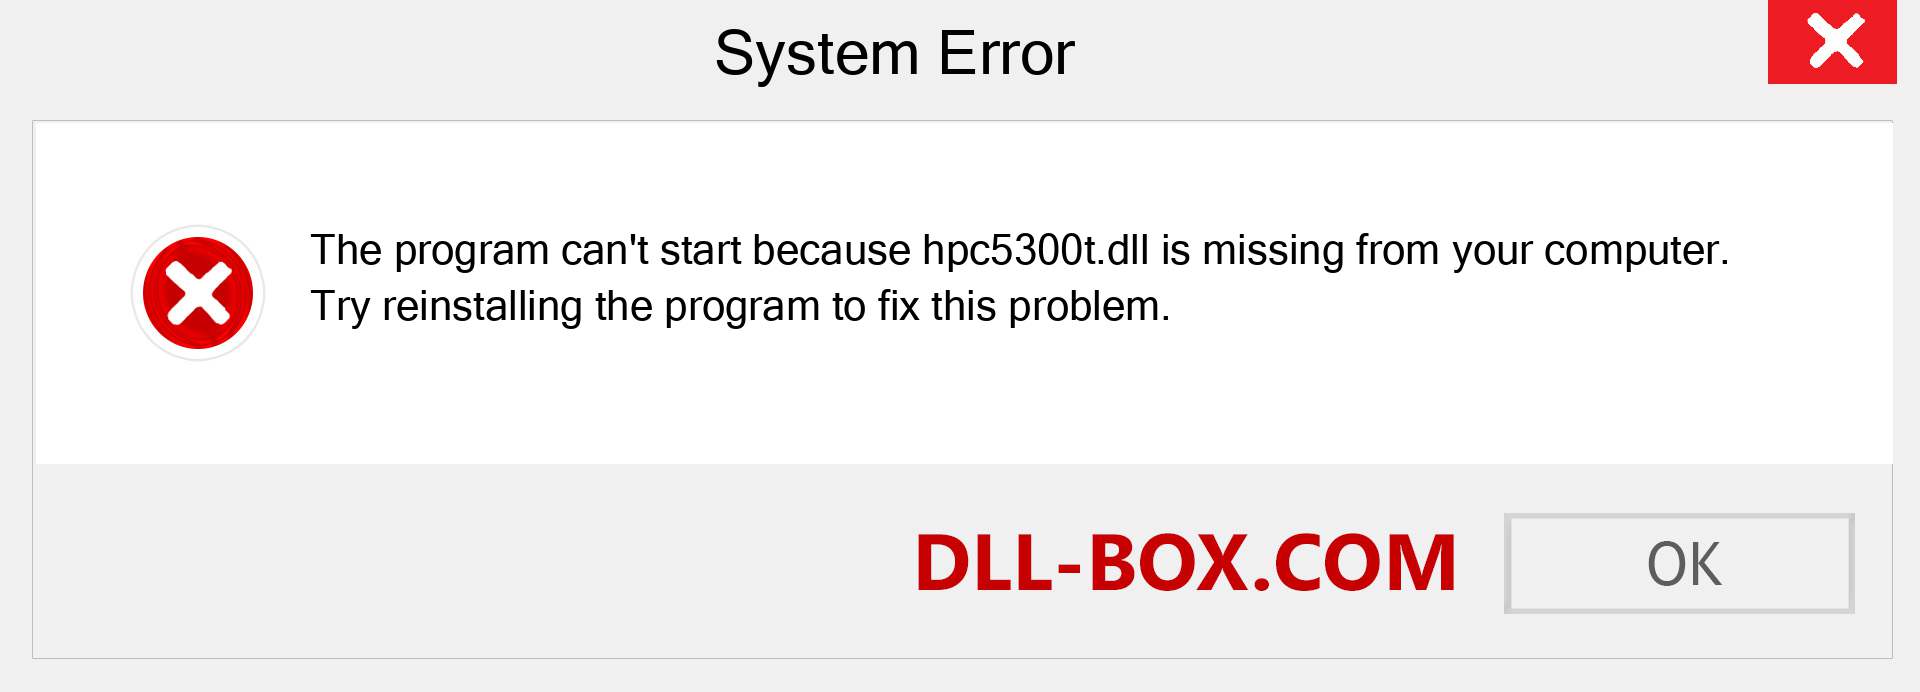  hpc5300t.dll file is missing?. Download for Windows 7, 8, 10 - Fix  hpc5300t dll Missing Error on Windows, photos, images